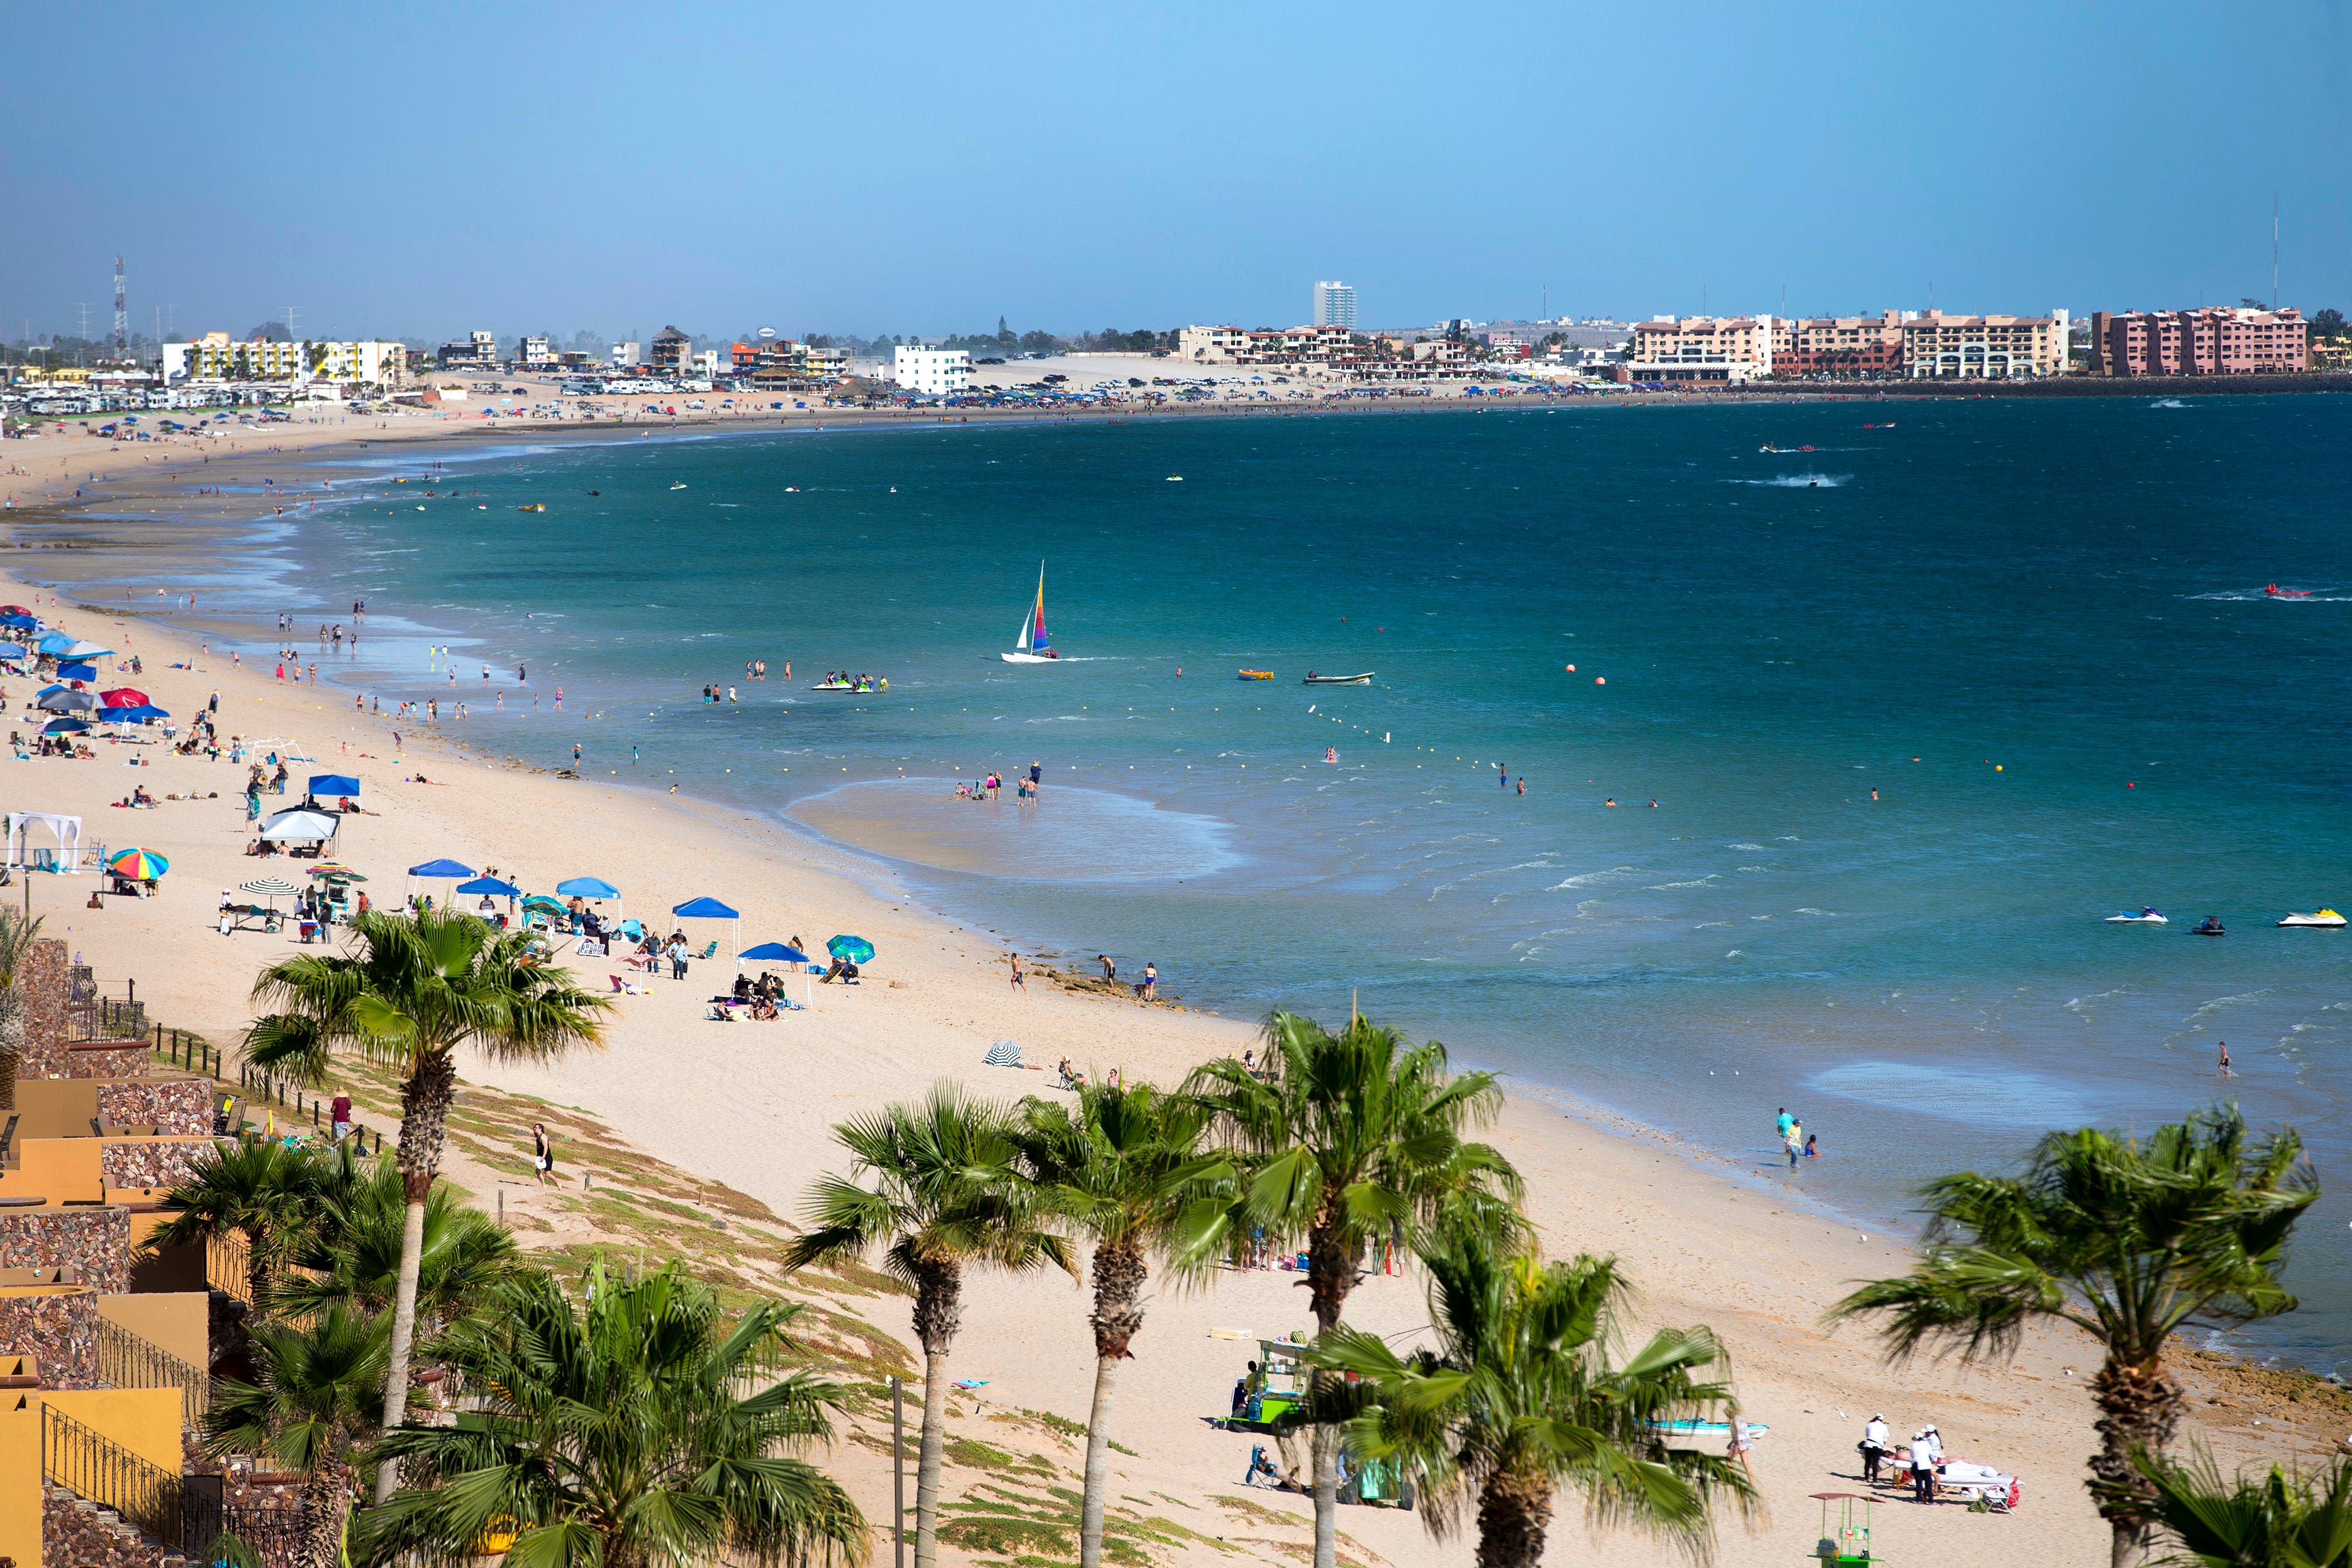 Puerto Peñasco summer vacation planner: Passports, safety and the best things to do